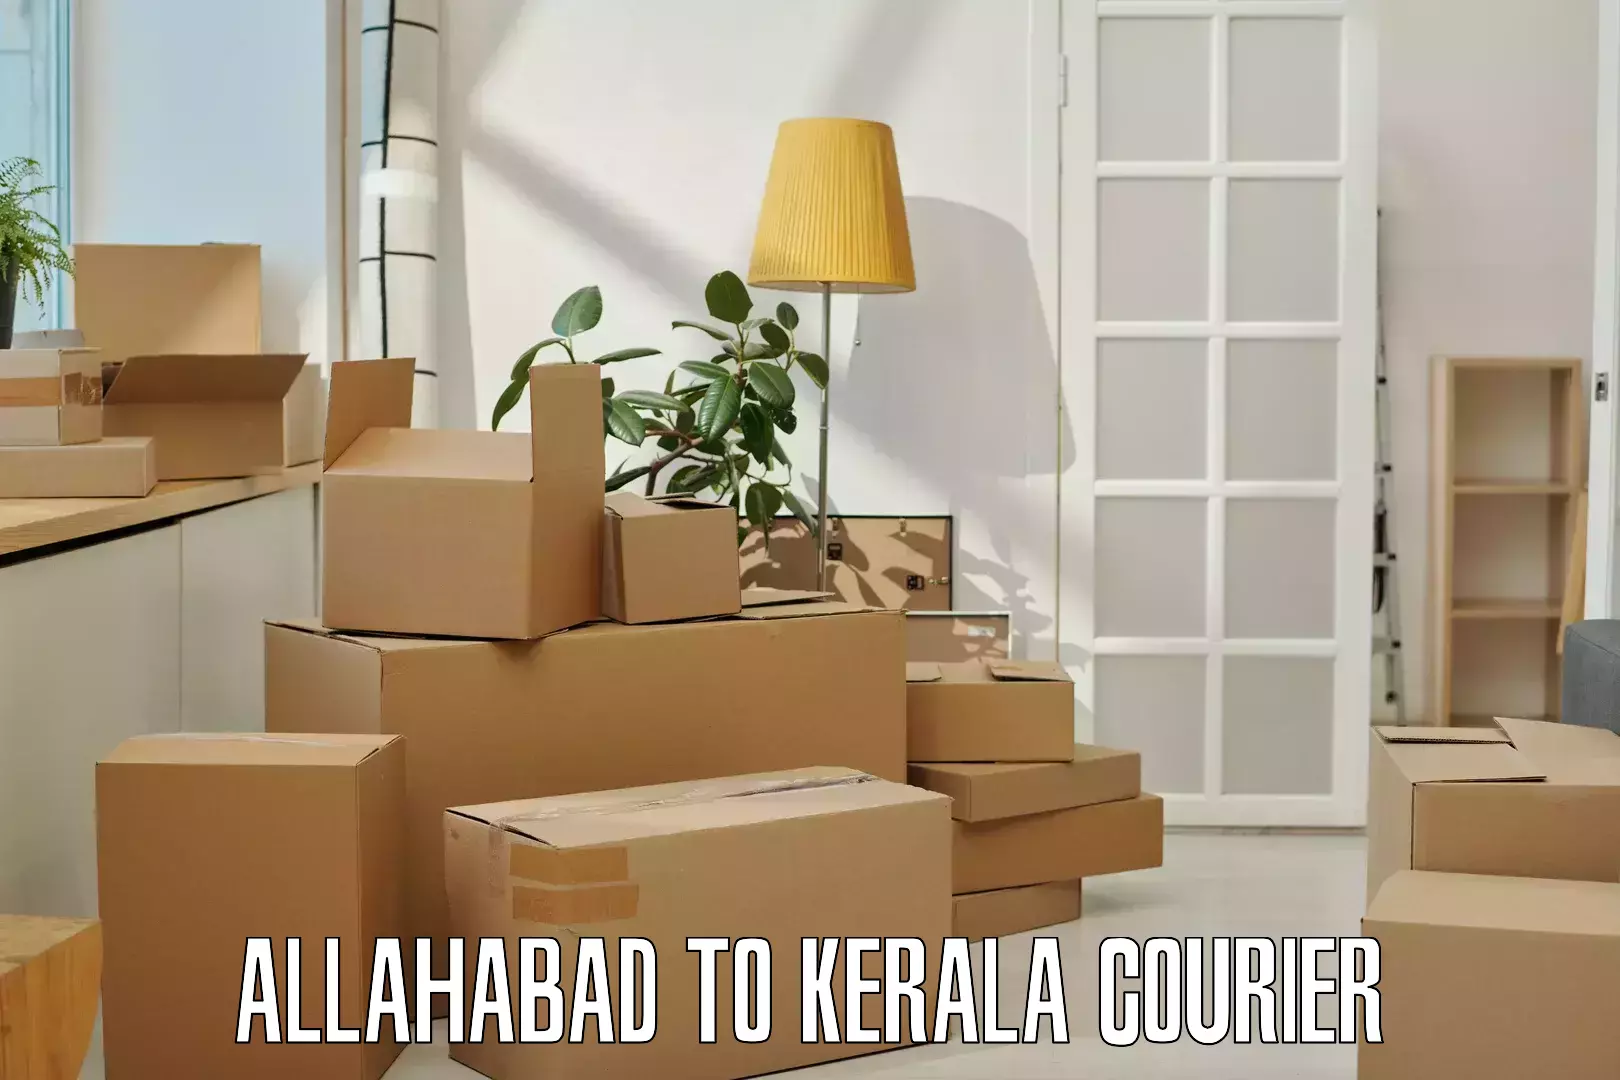 Supply chain delivery Allahabad to Cochin University of Science and Technology